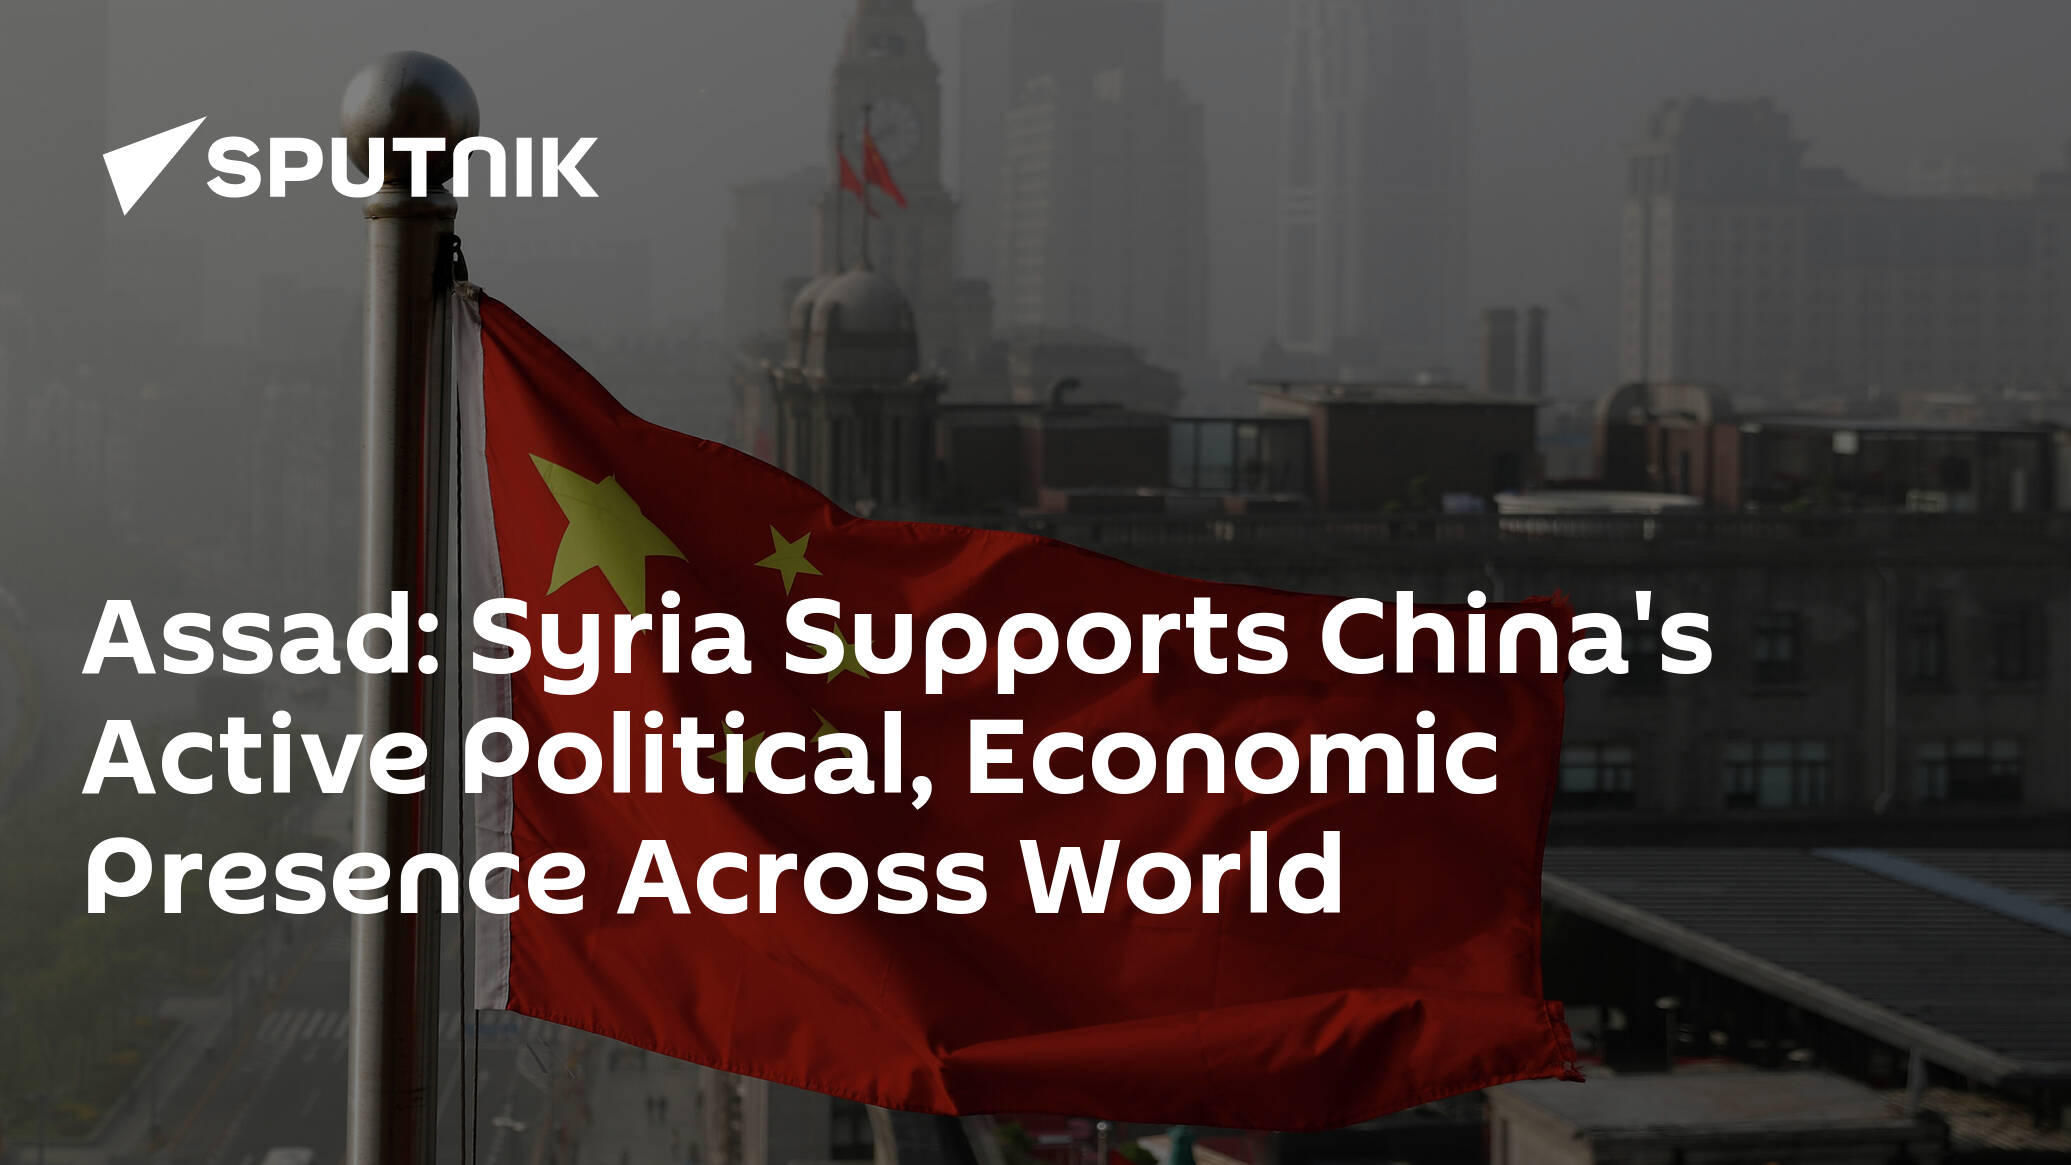 Assad: Syria Supports China's Active Political, Economic Presence Across World